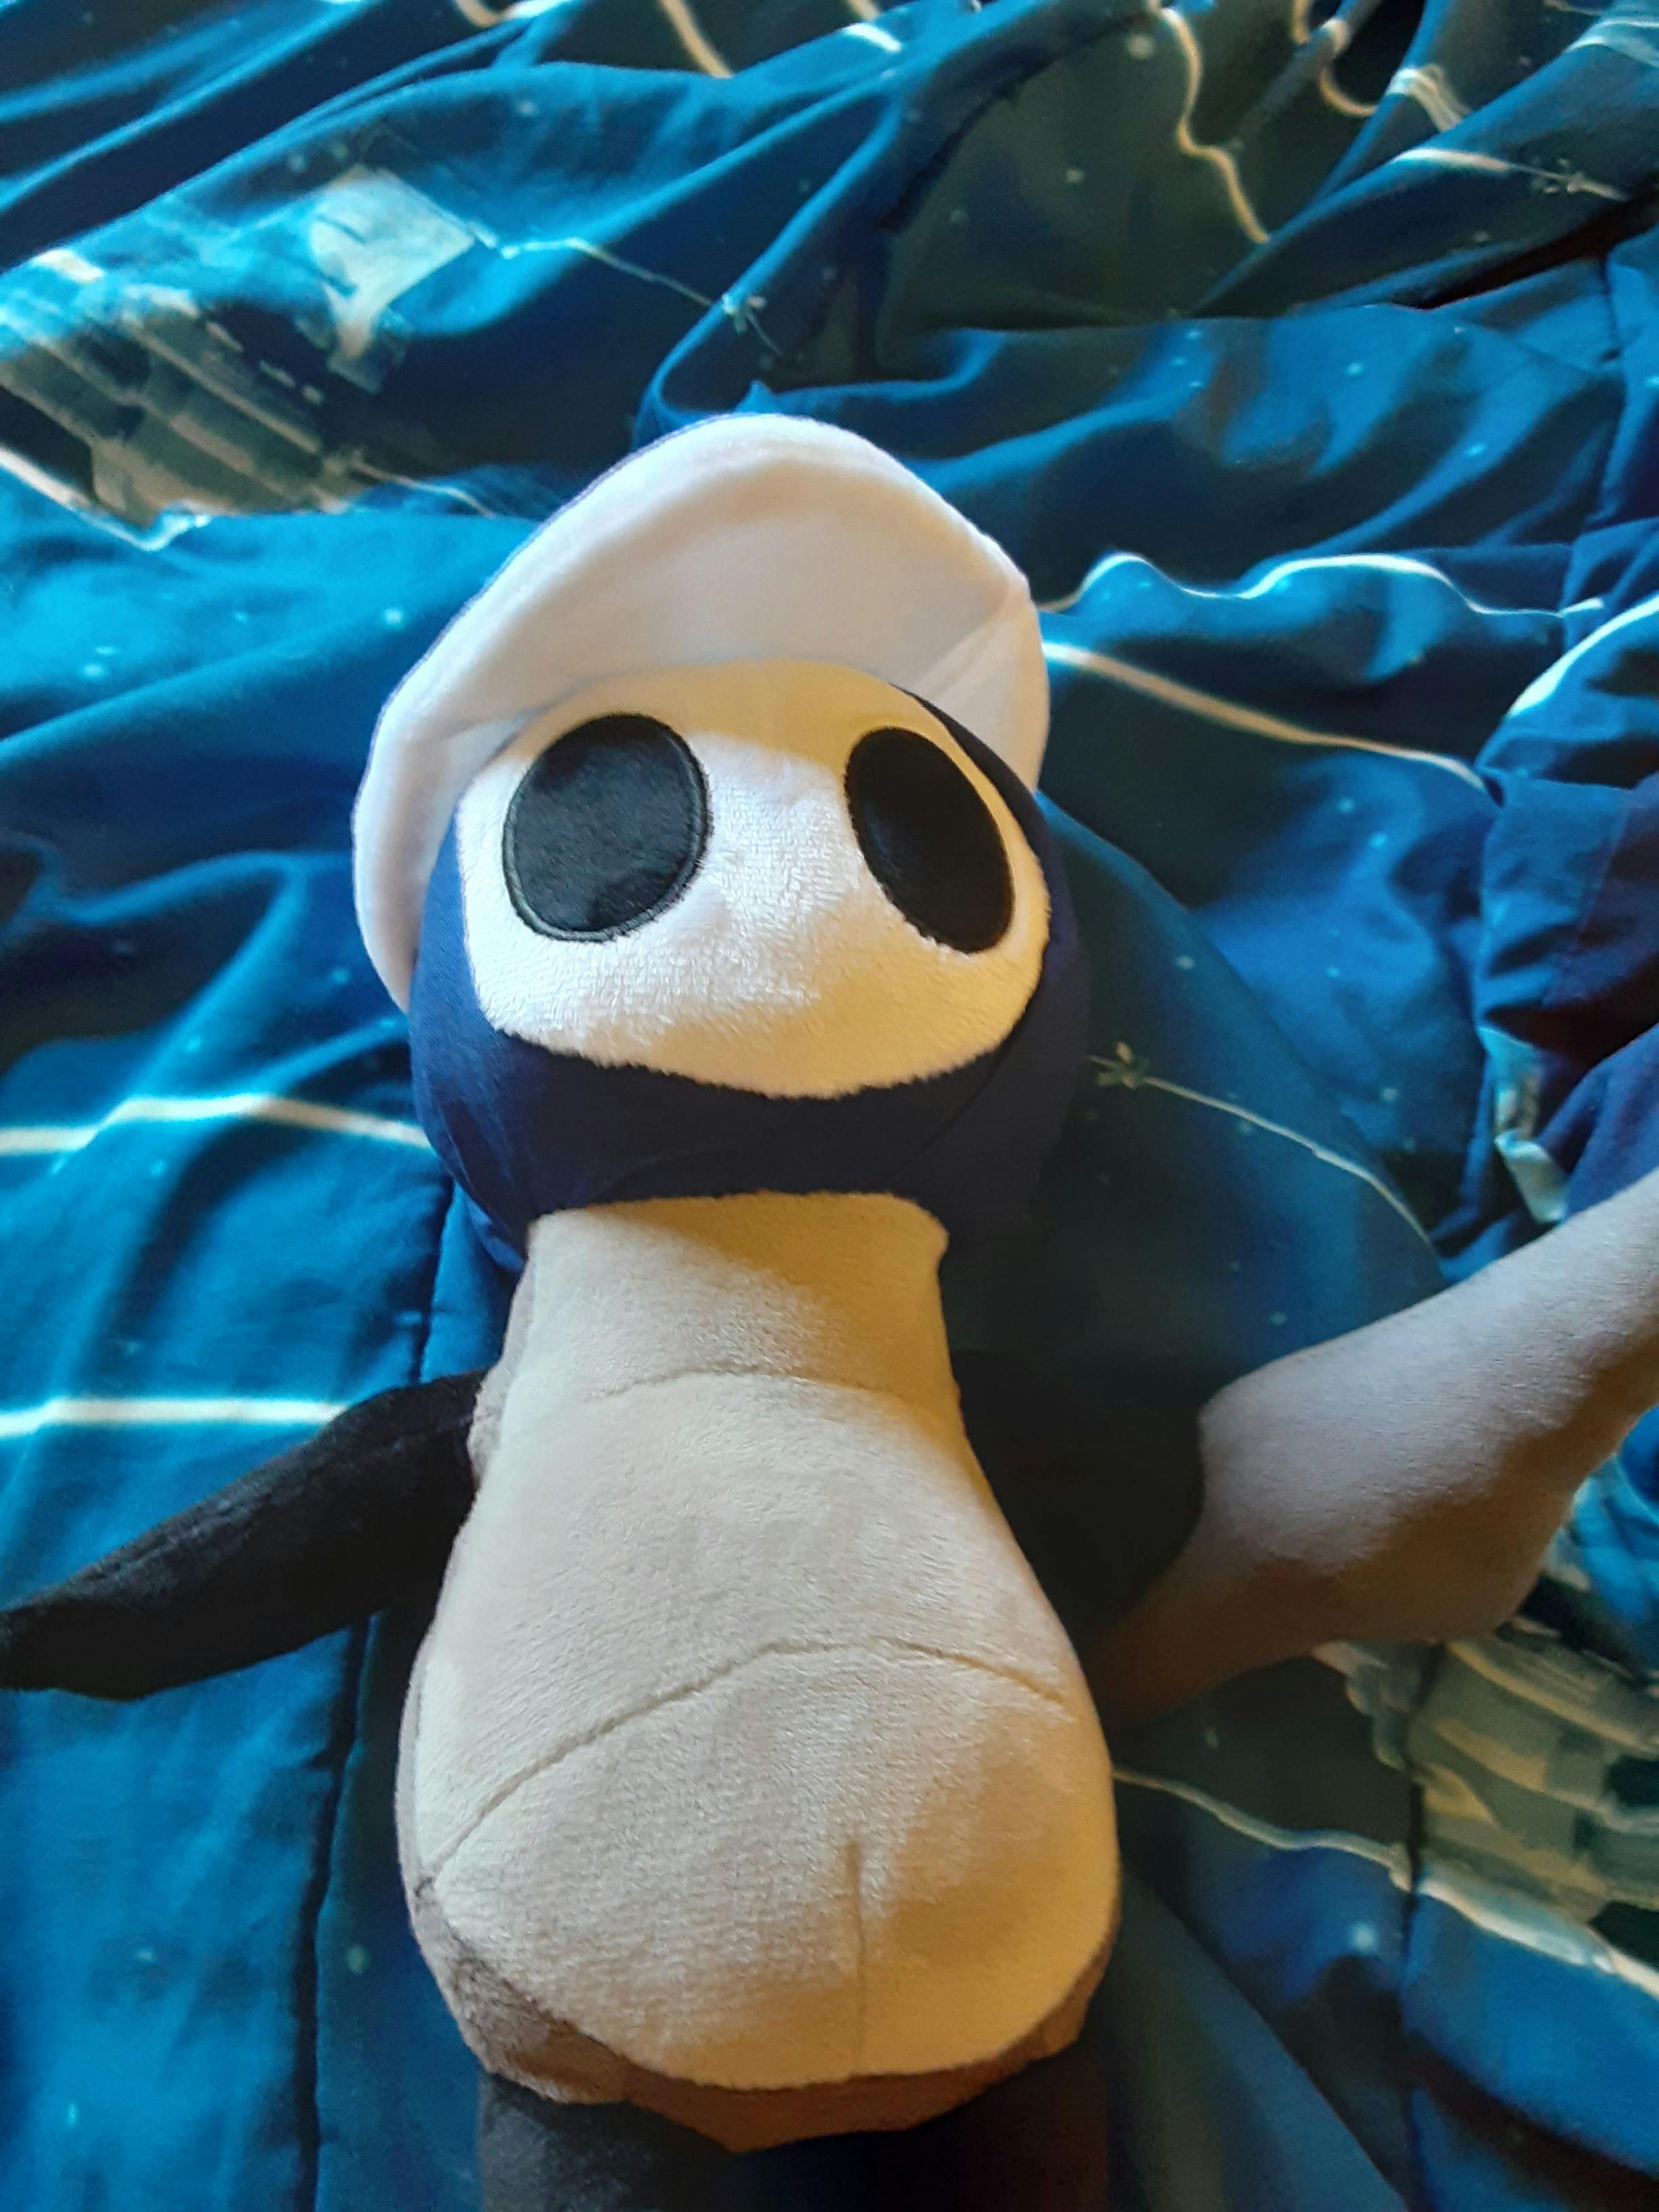 hollow knight silksong plushie